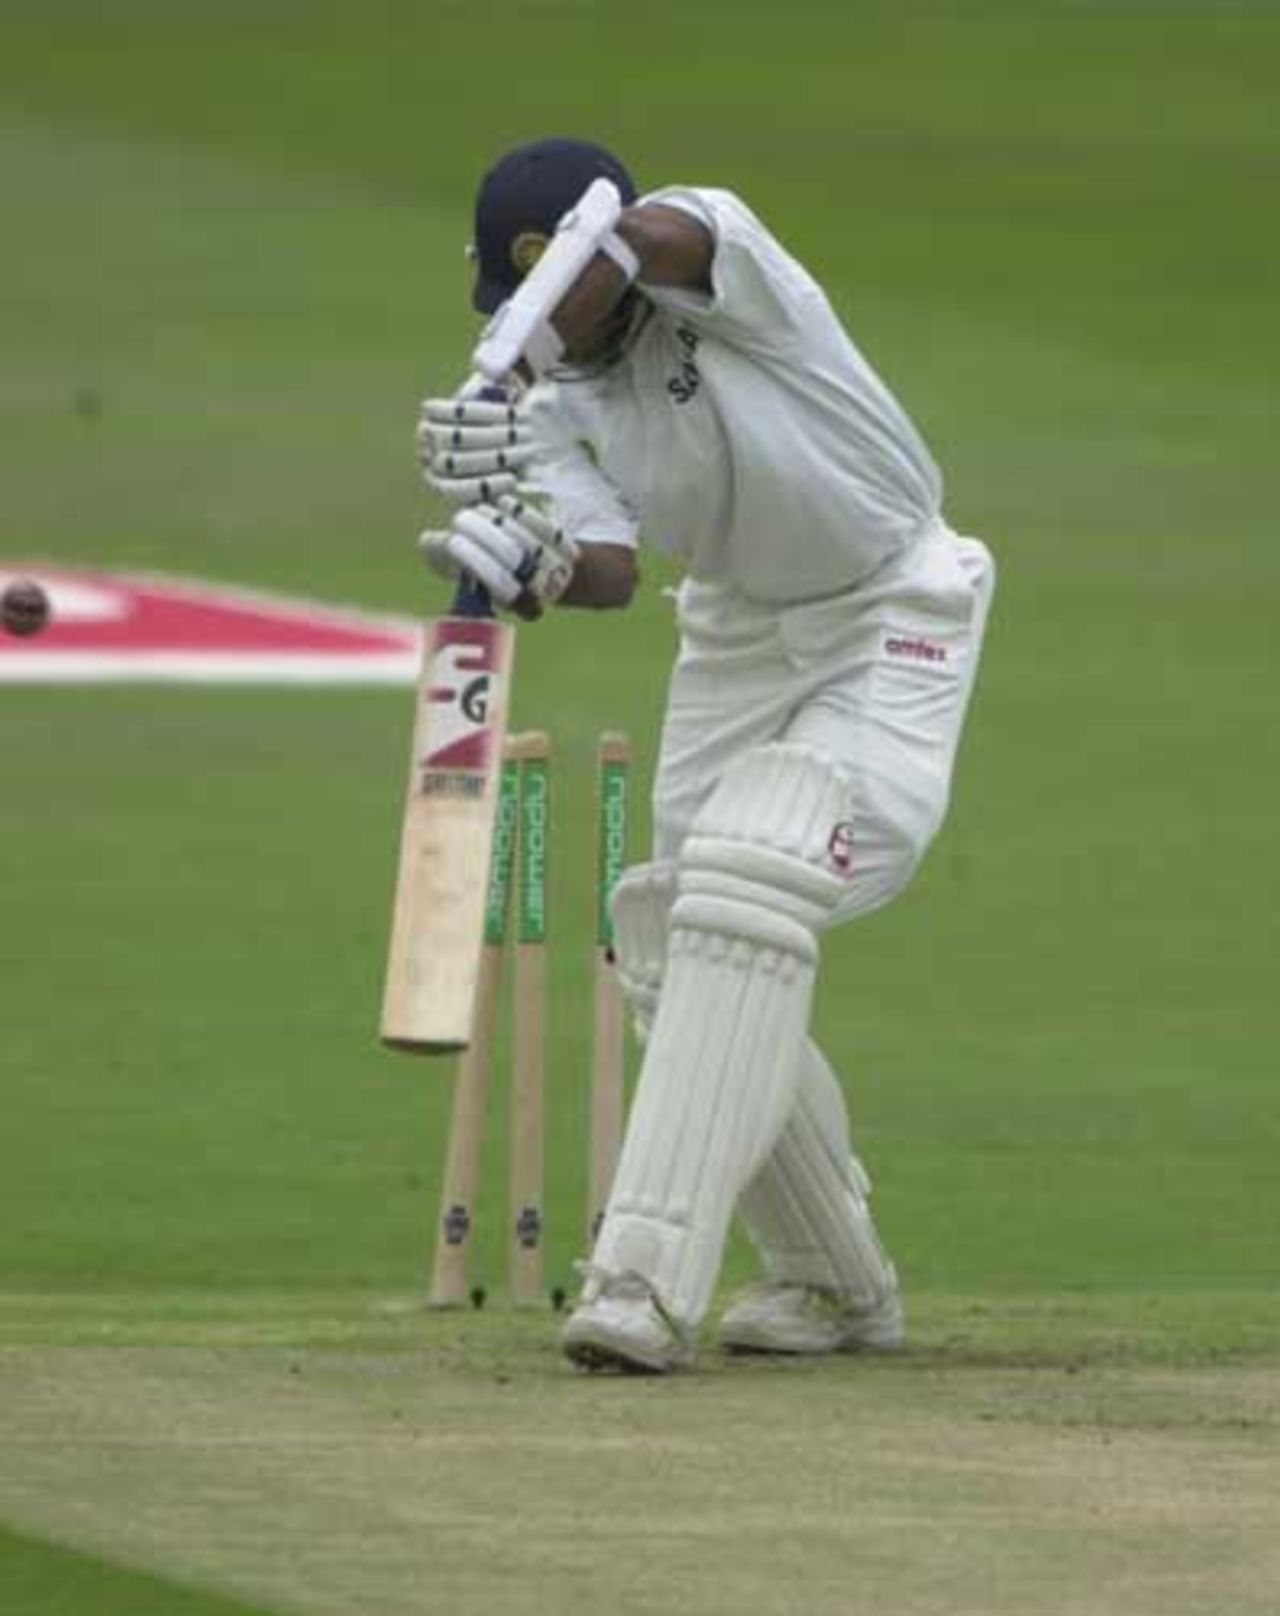 Jaffer clean bowled Hoggard for 0, 2nd npower Test at Trent Bridge, August 2002